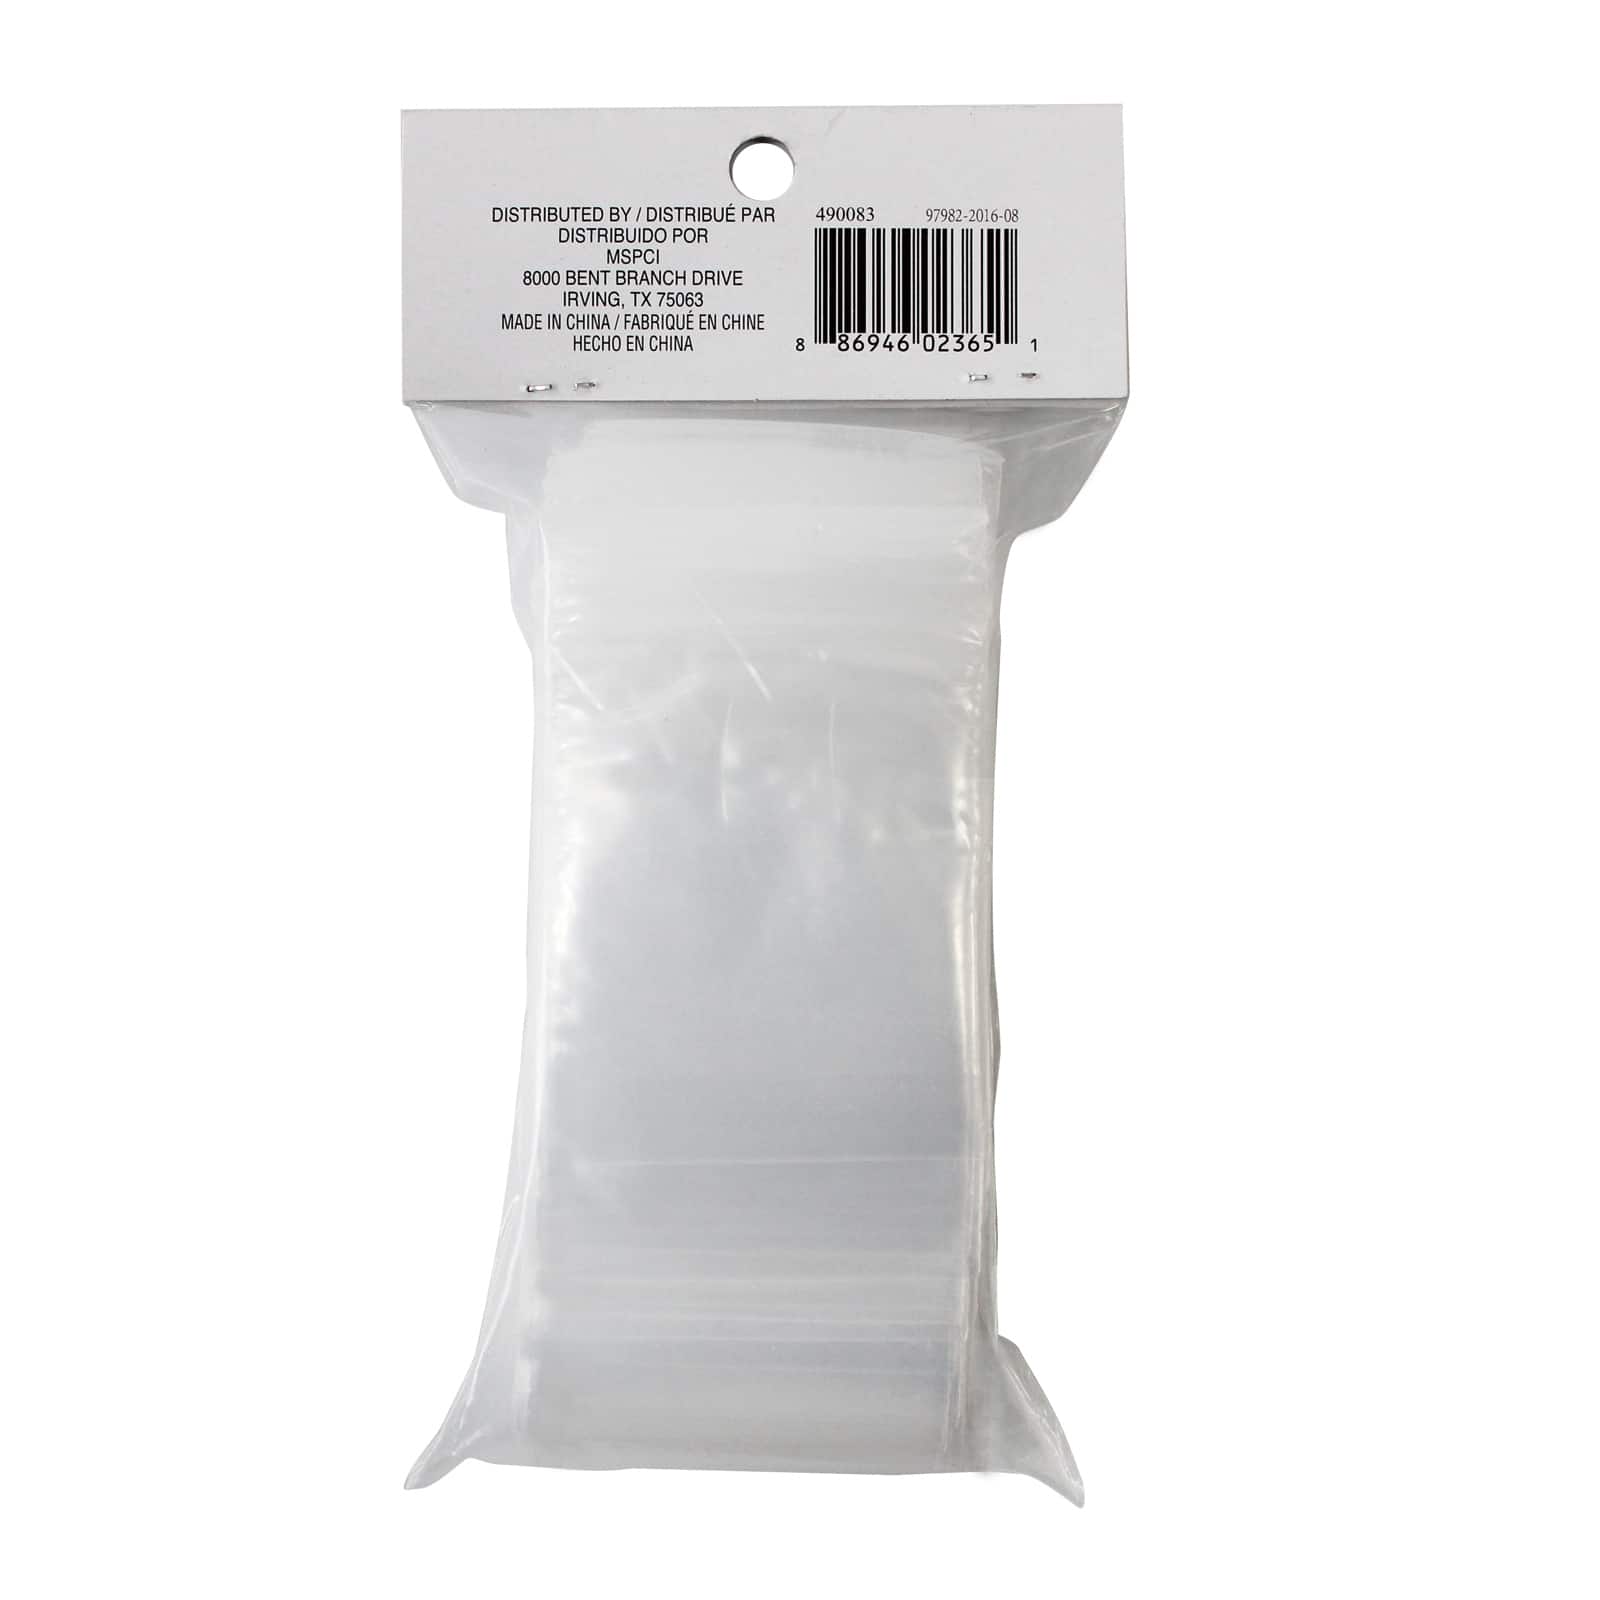 Resealable Bags 5x8 Inches Resealable Jewelry Bags - RB-58 - Qty 50